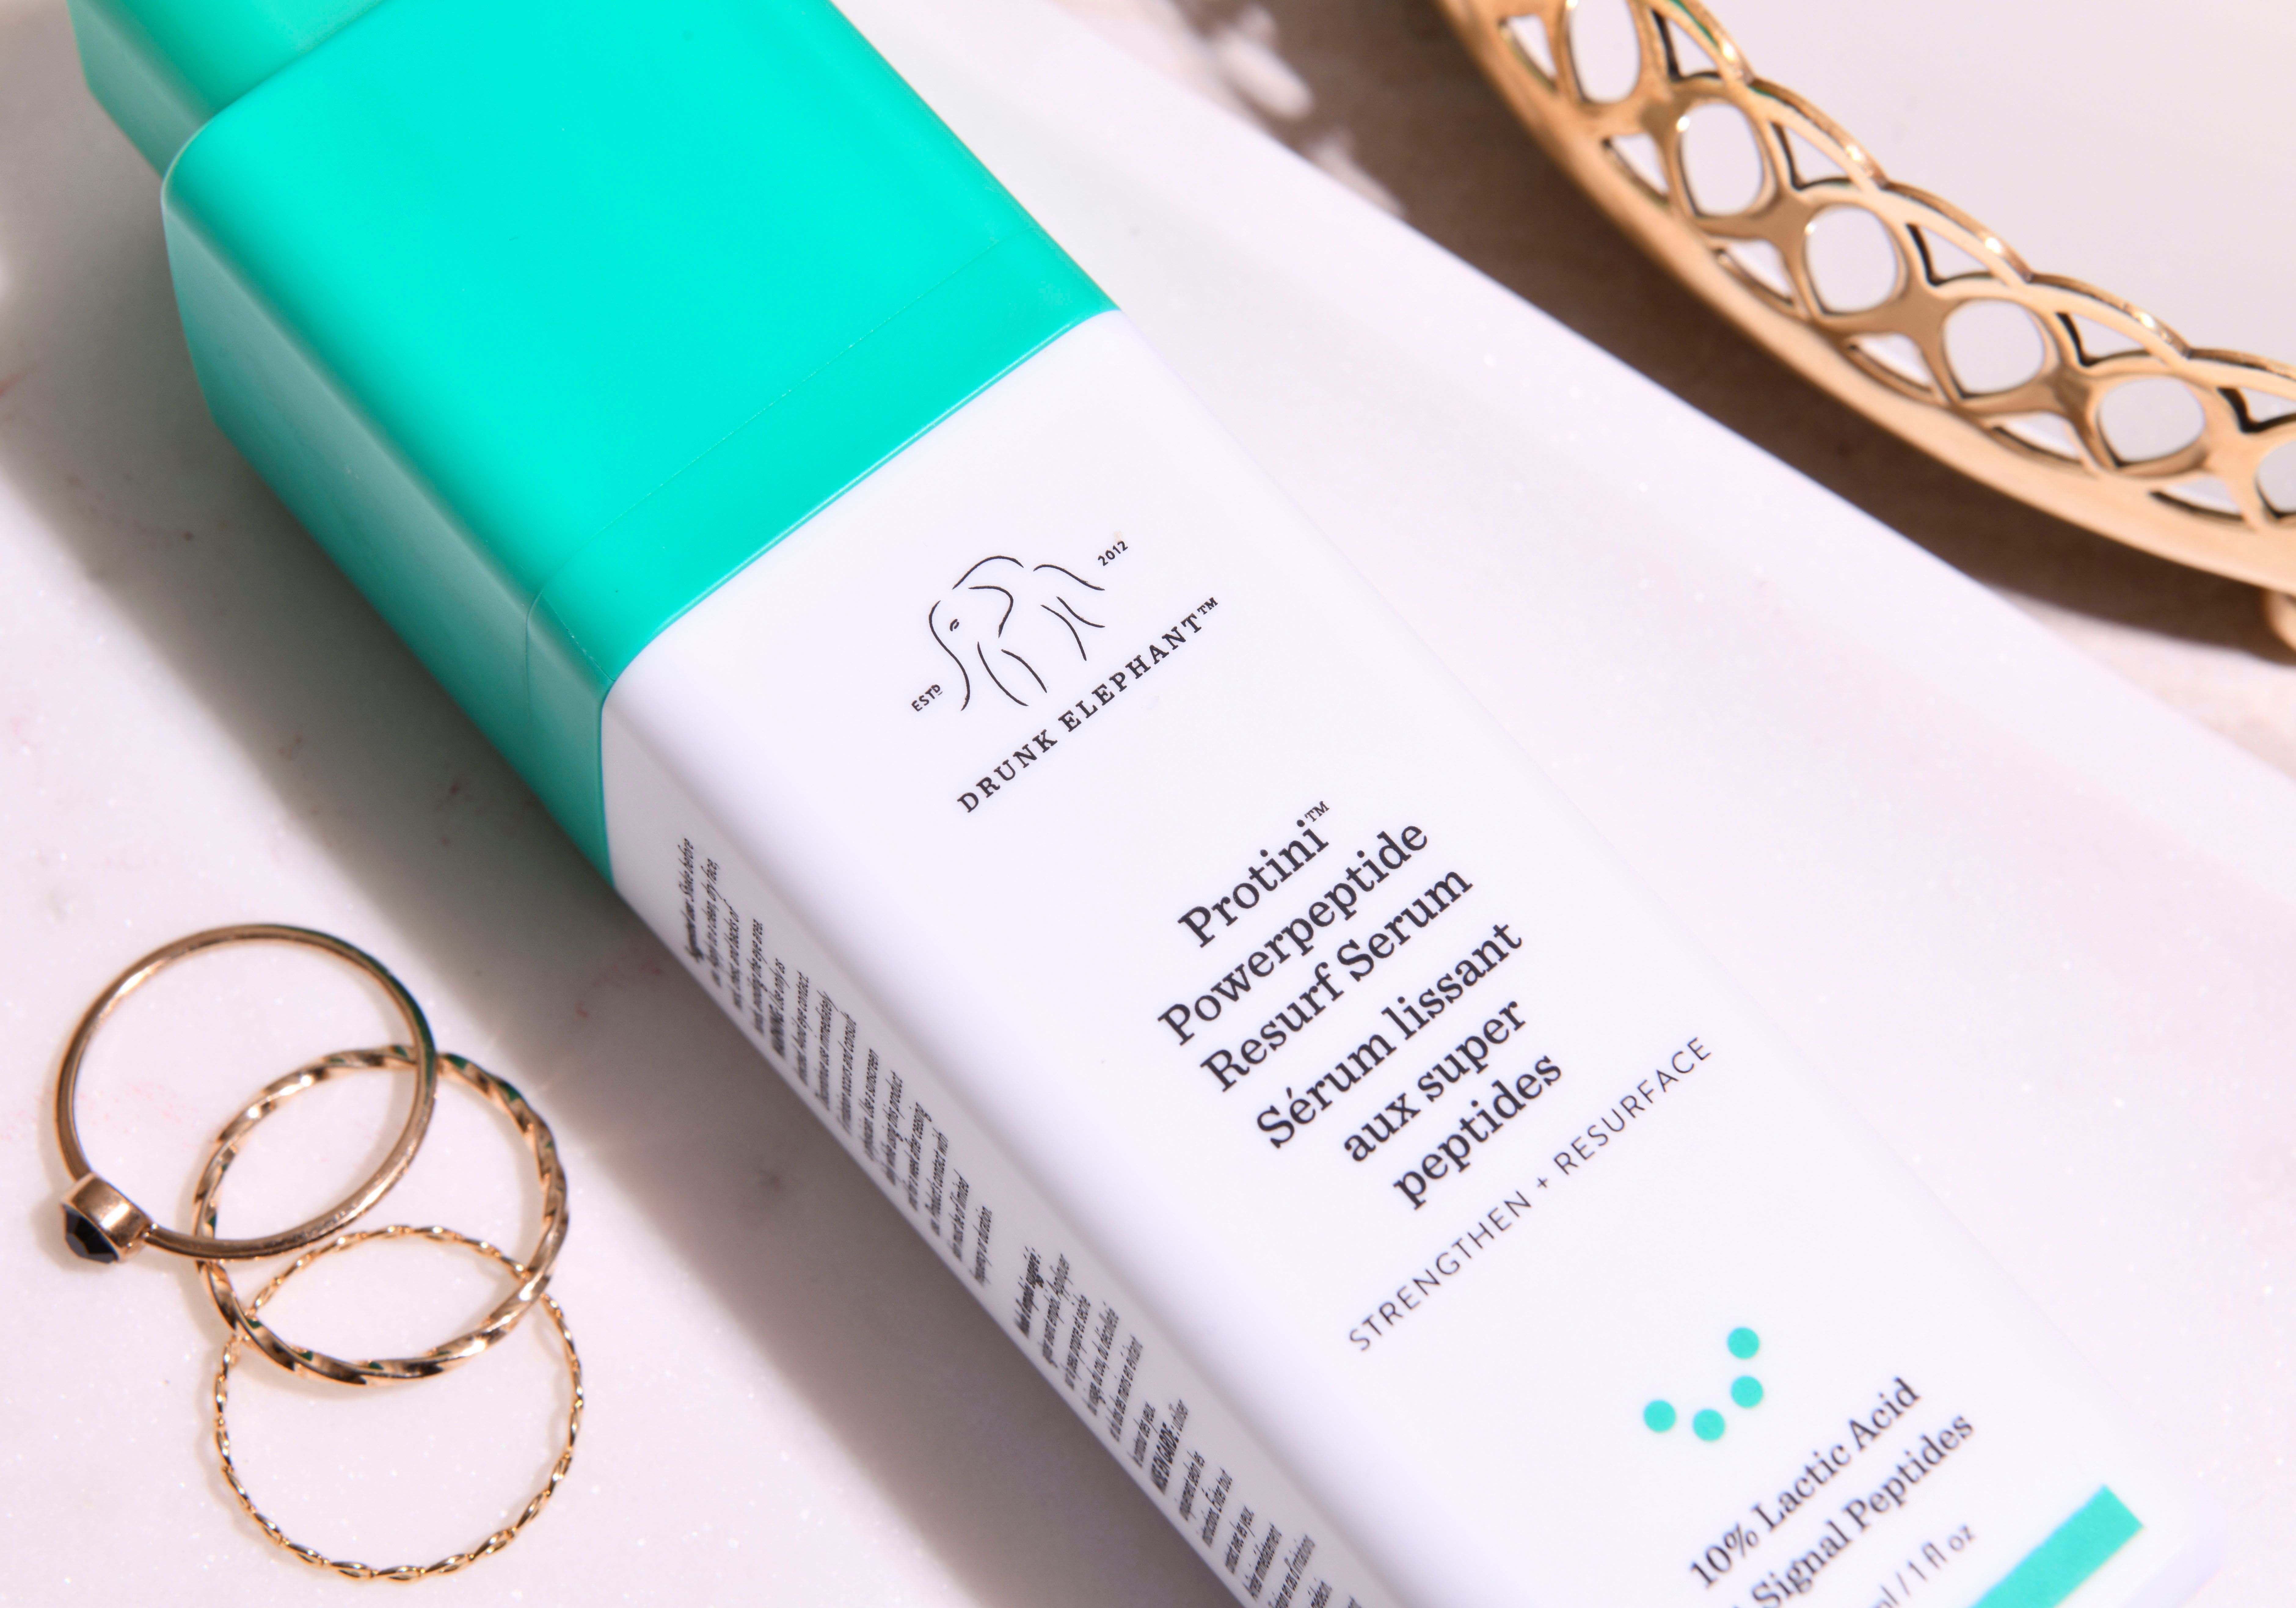 Our Review Of Drunk Elephant’s Protini Powerpeptide Resurf Serum